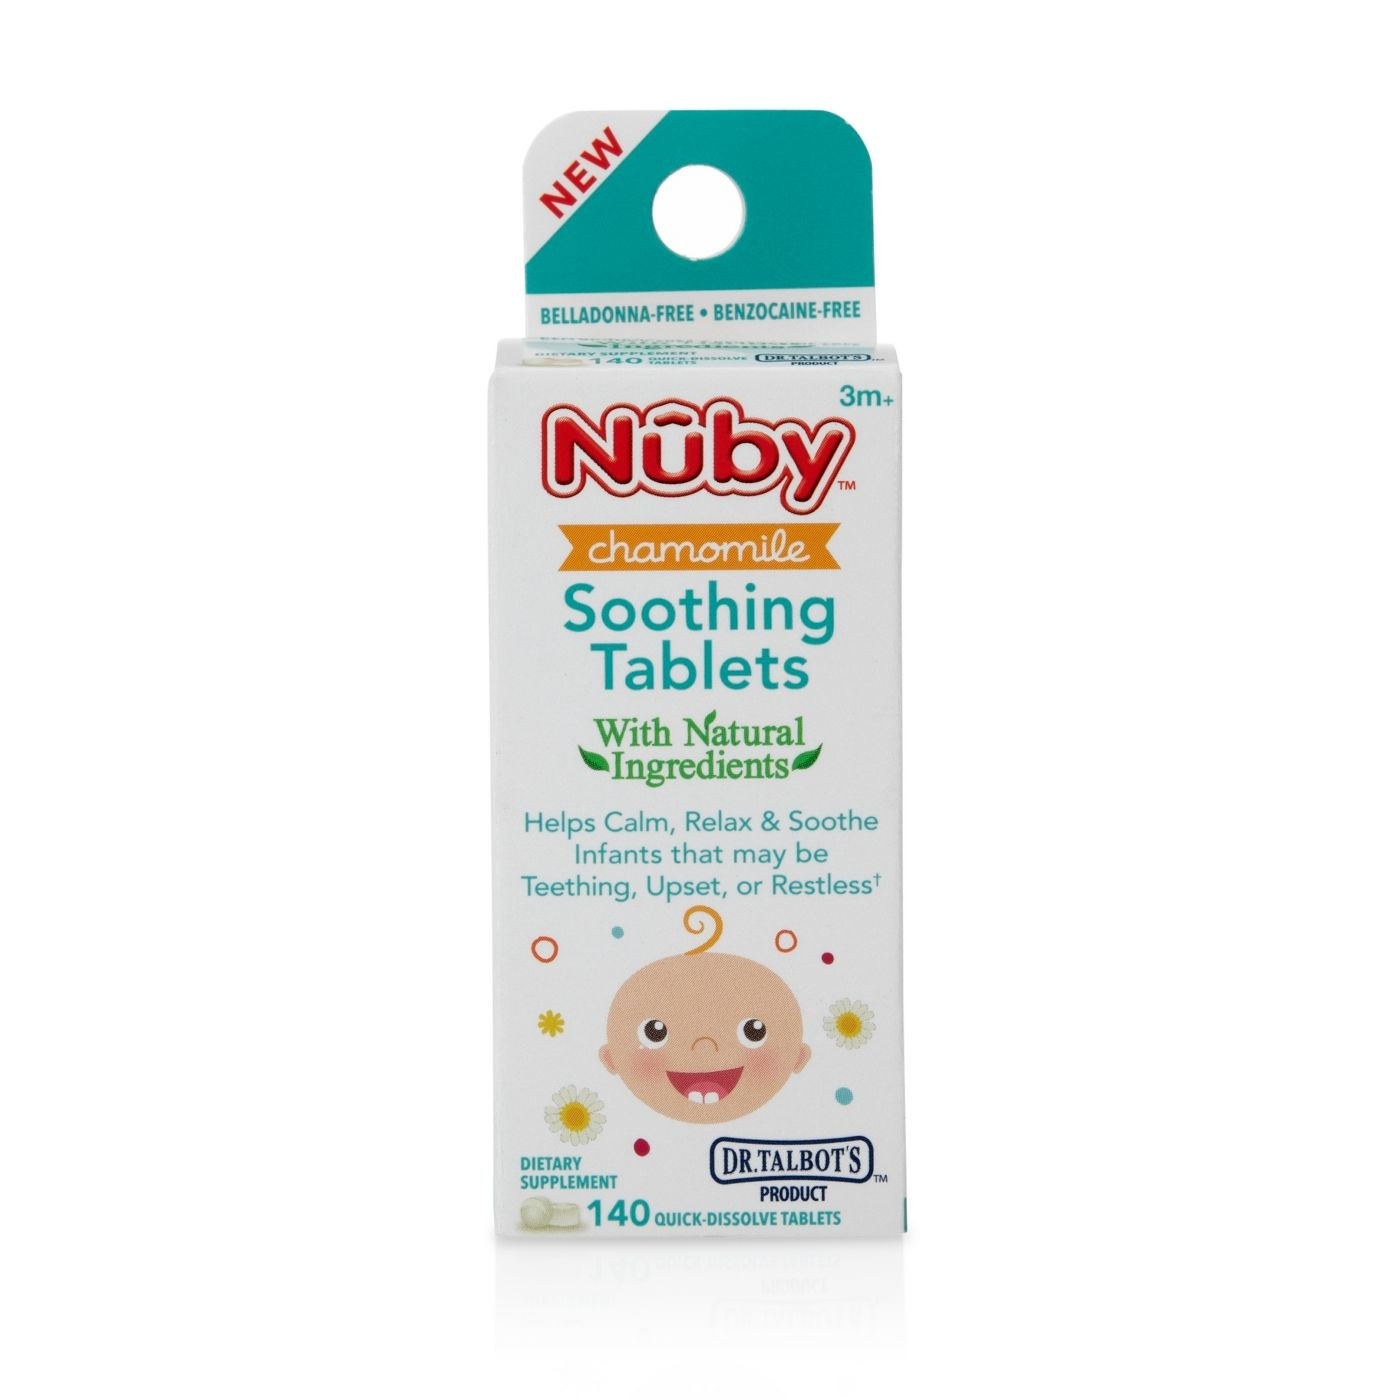 Box of Nuby Chamomile soothing tablets